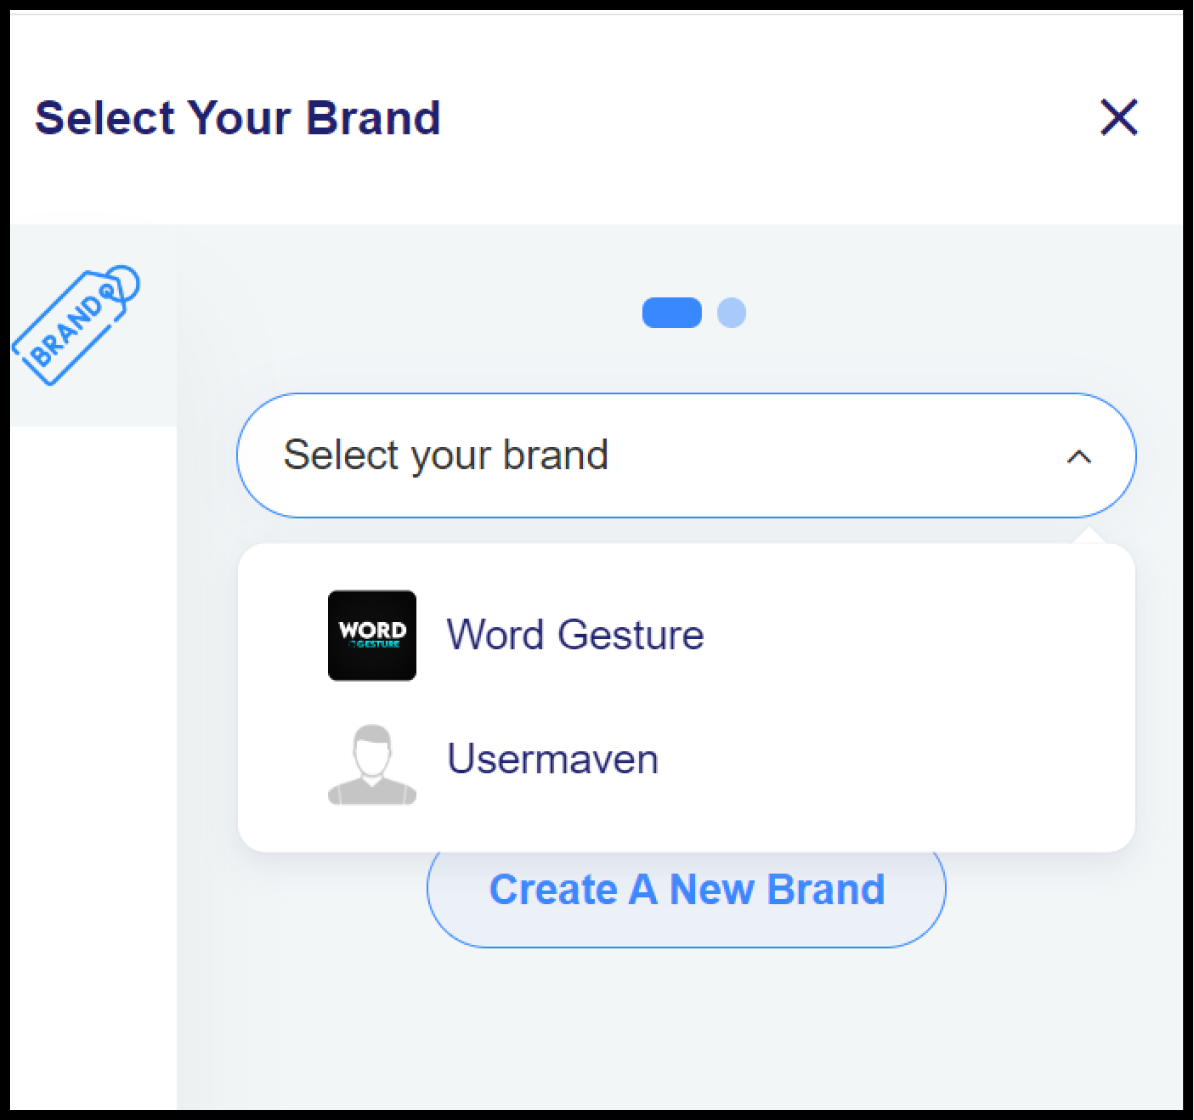 Select your brand